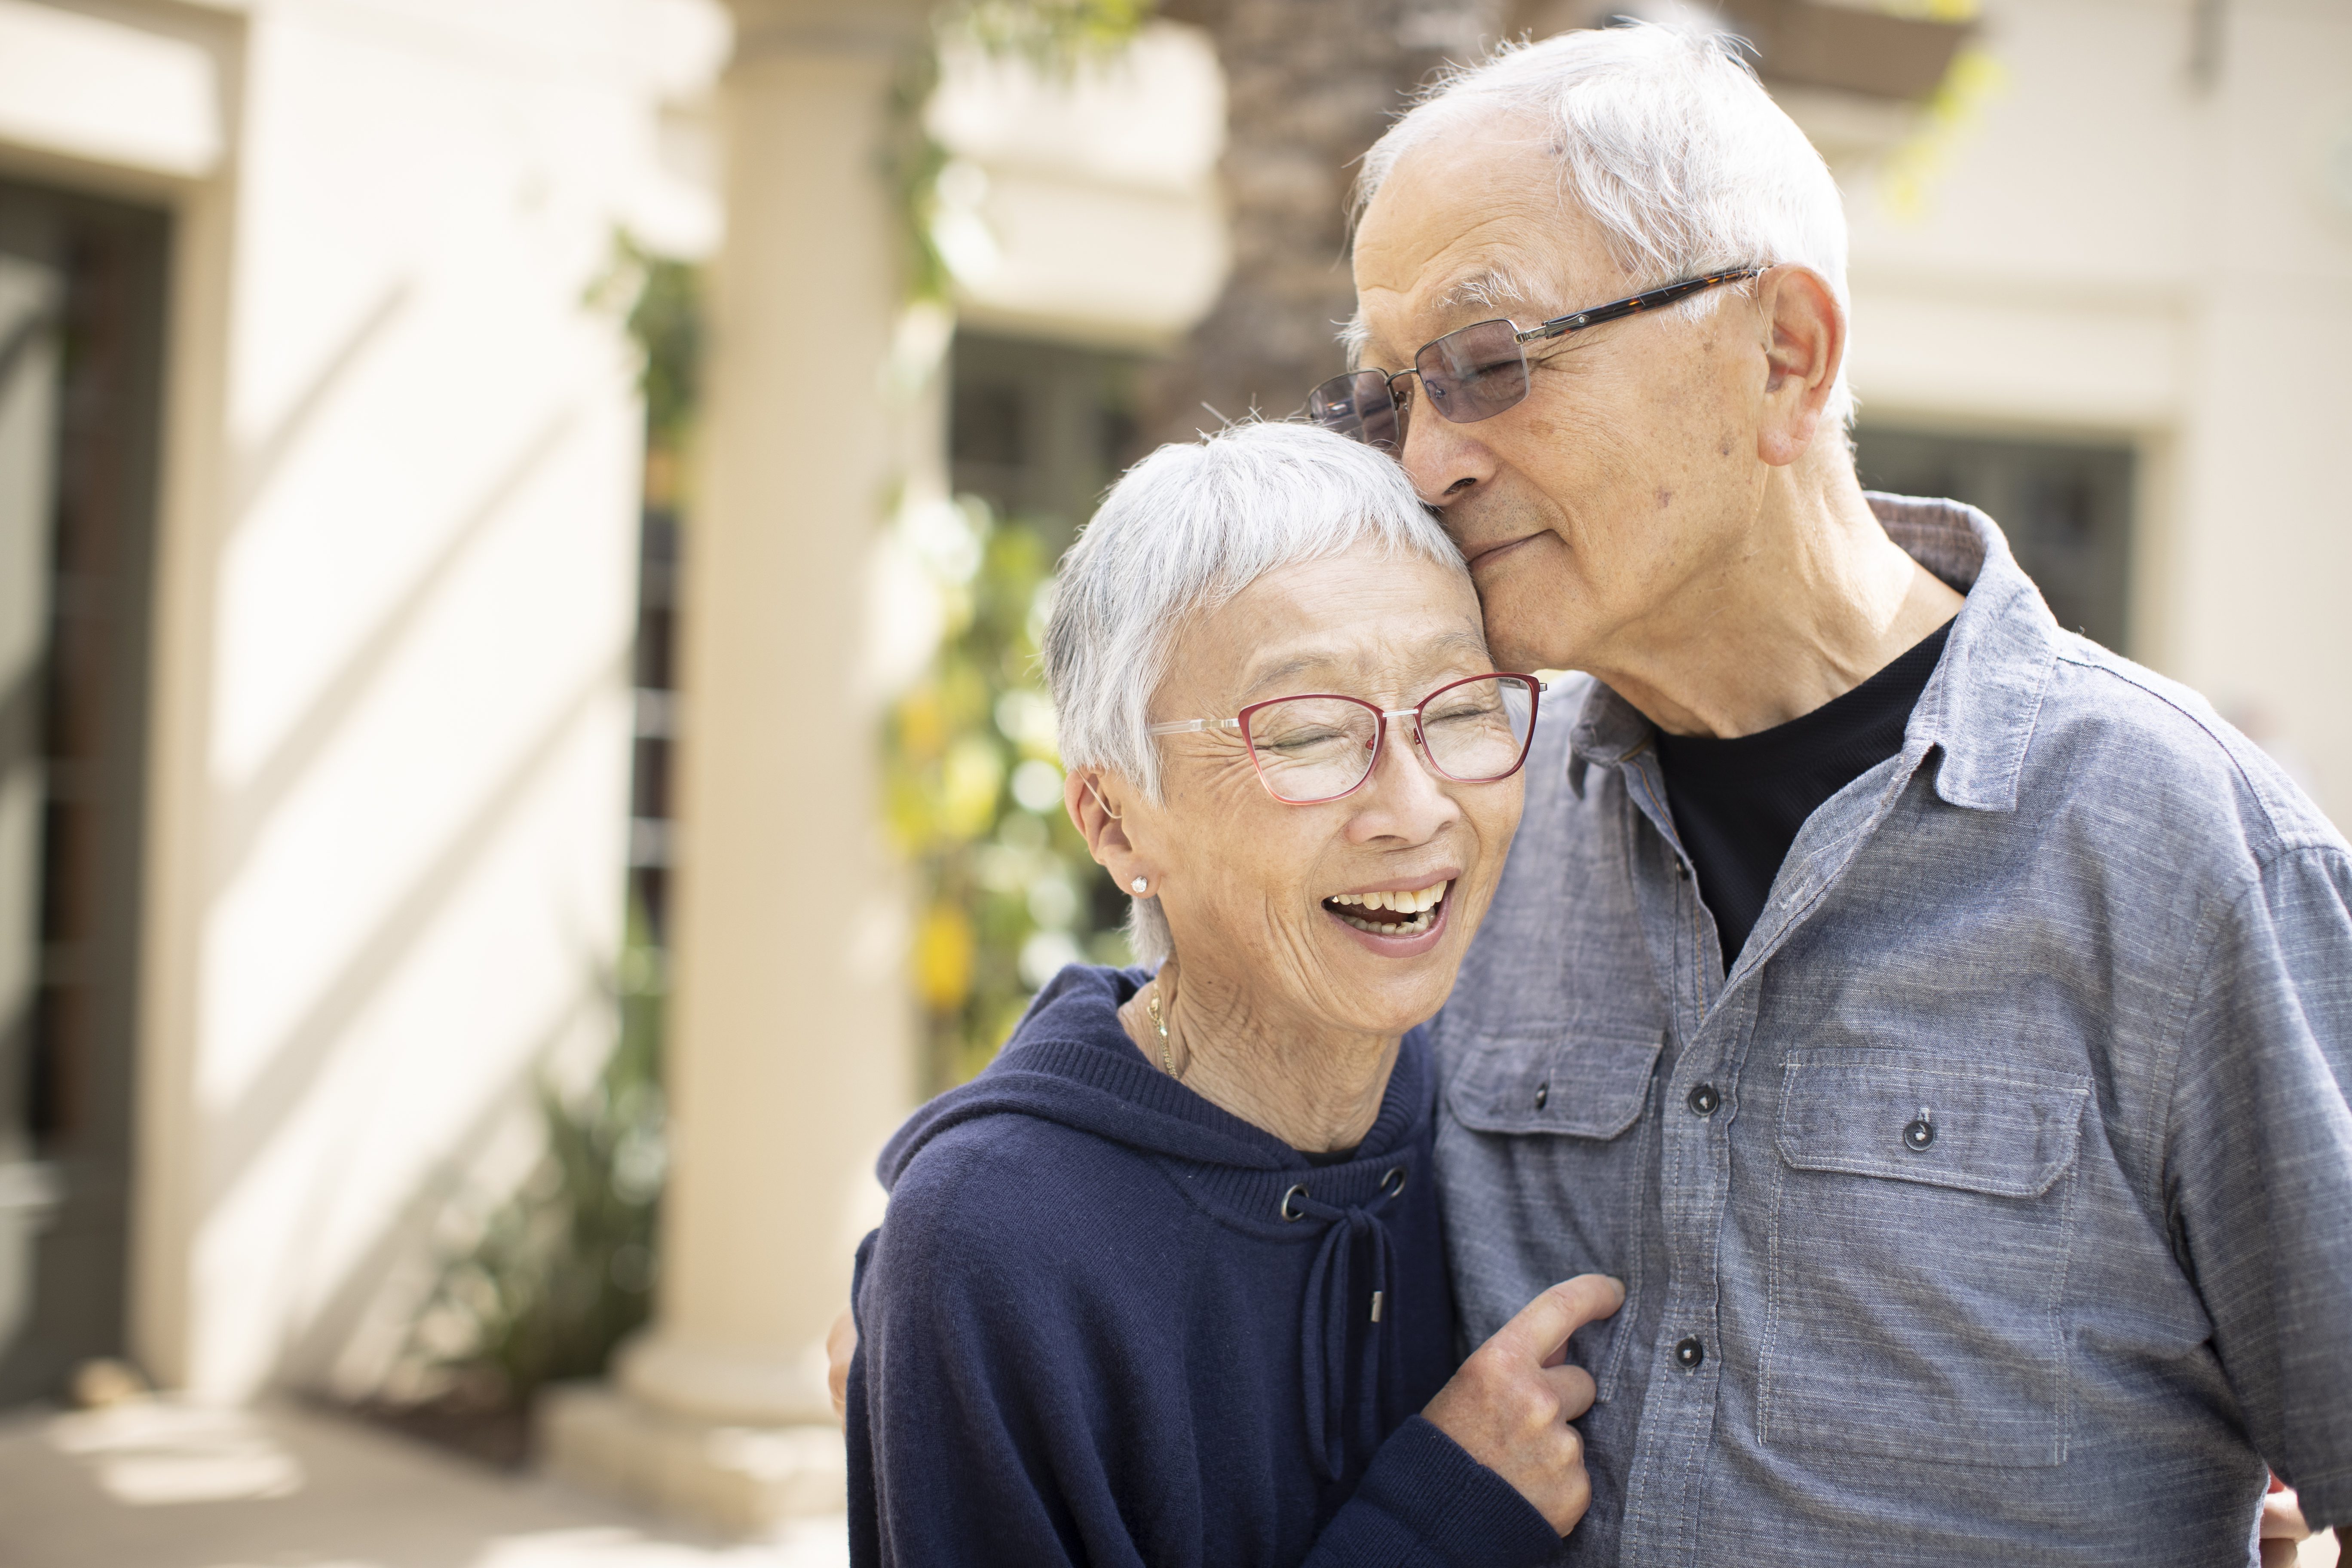 An older couple embraces, their faces beaming with joy, as they share a warm and affectionate hug.